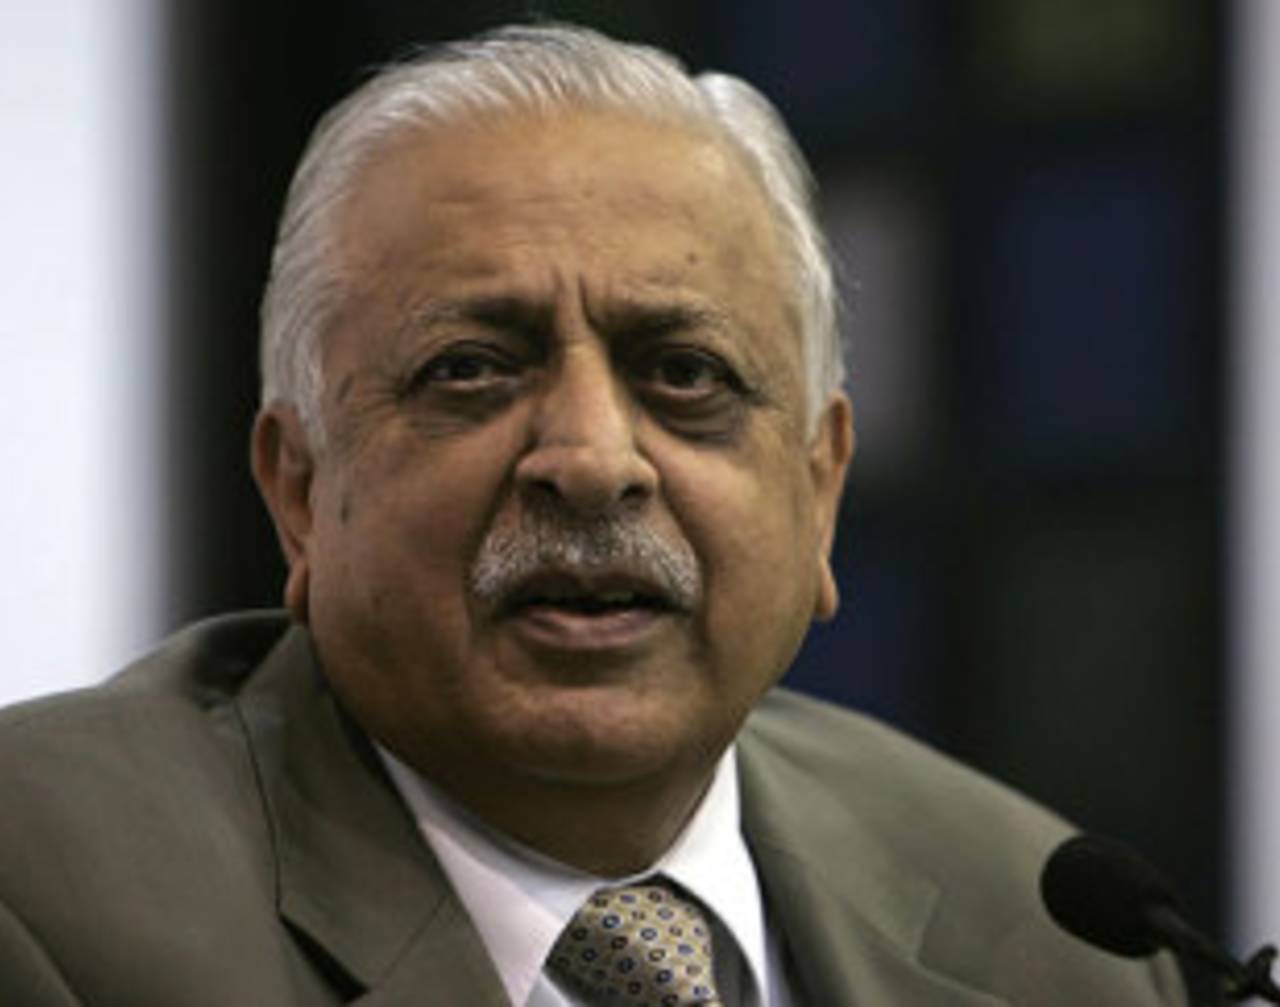 Ijaz Butt takes questions from the media, Lahore, October 19, 2009